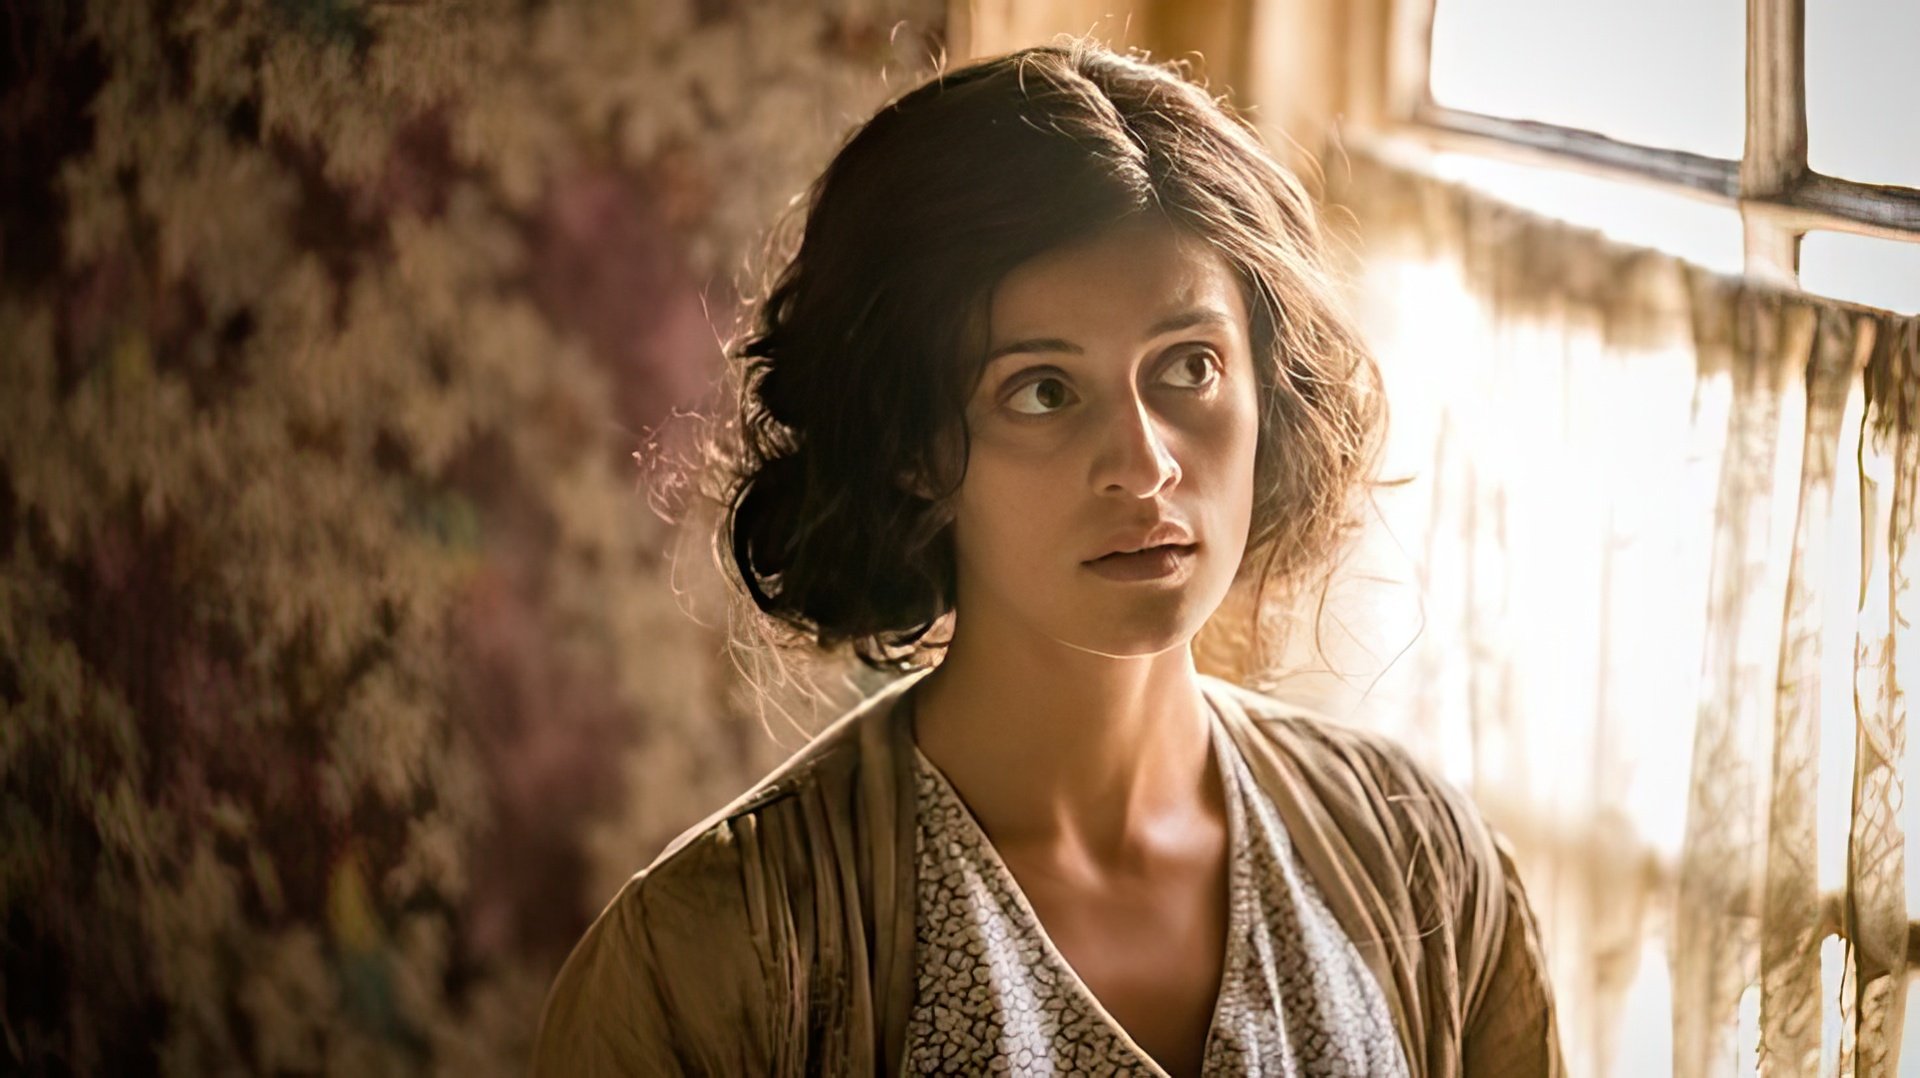 Anya Chalotra in the movie 'The ABC Murders'